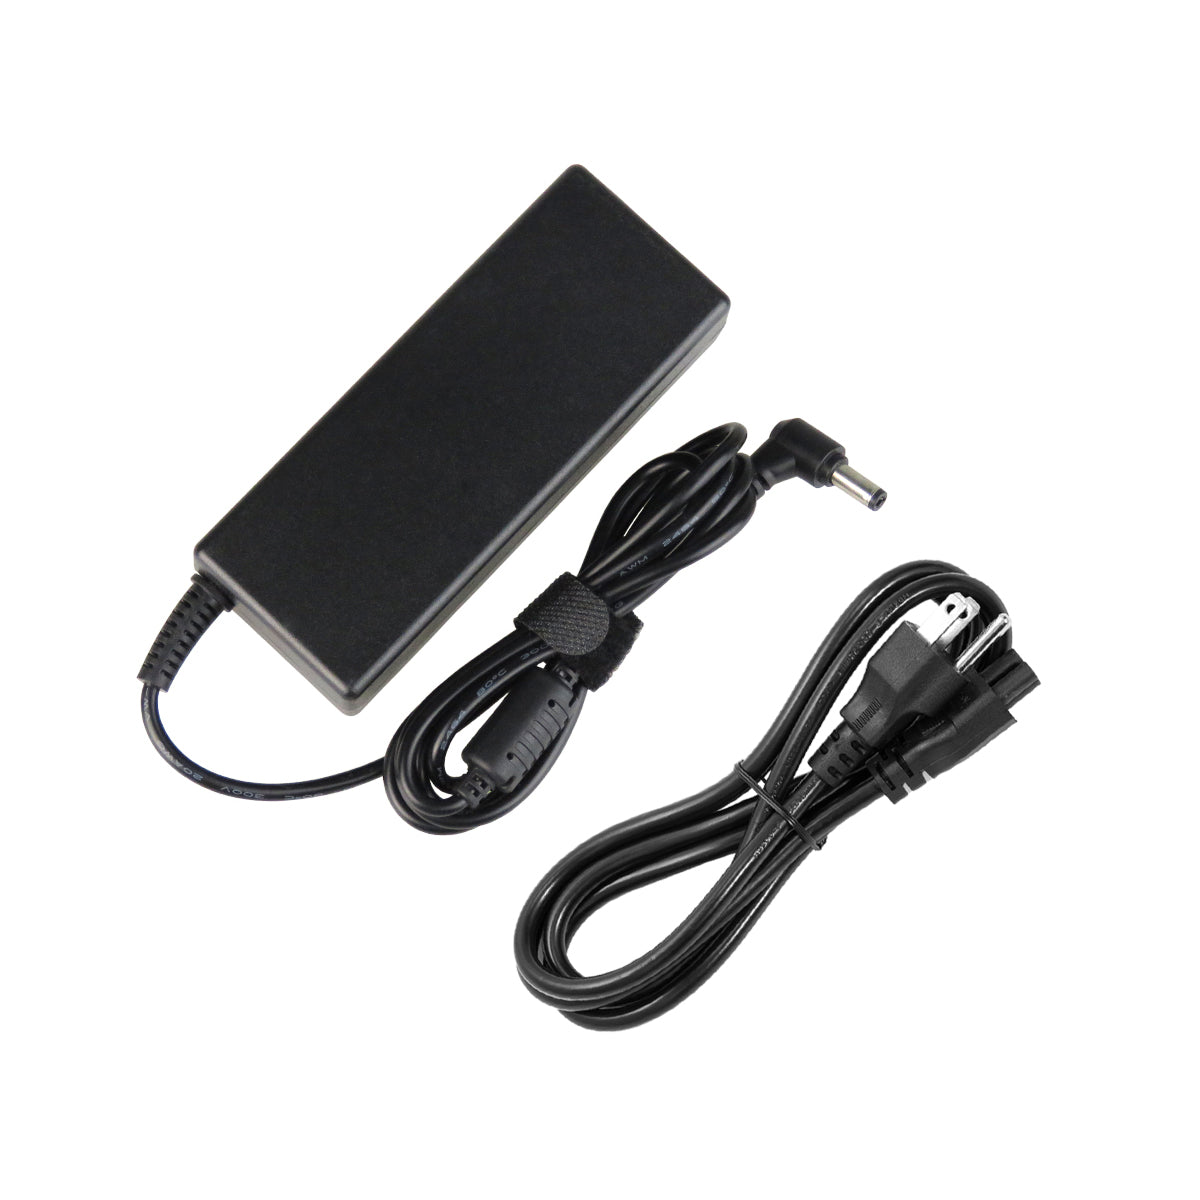 AC Adapter Charger for ASUS X56KR Notebook.